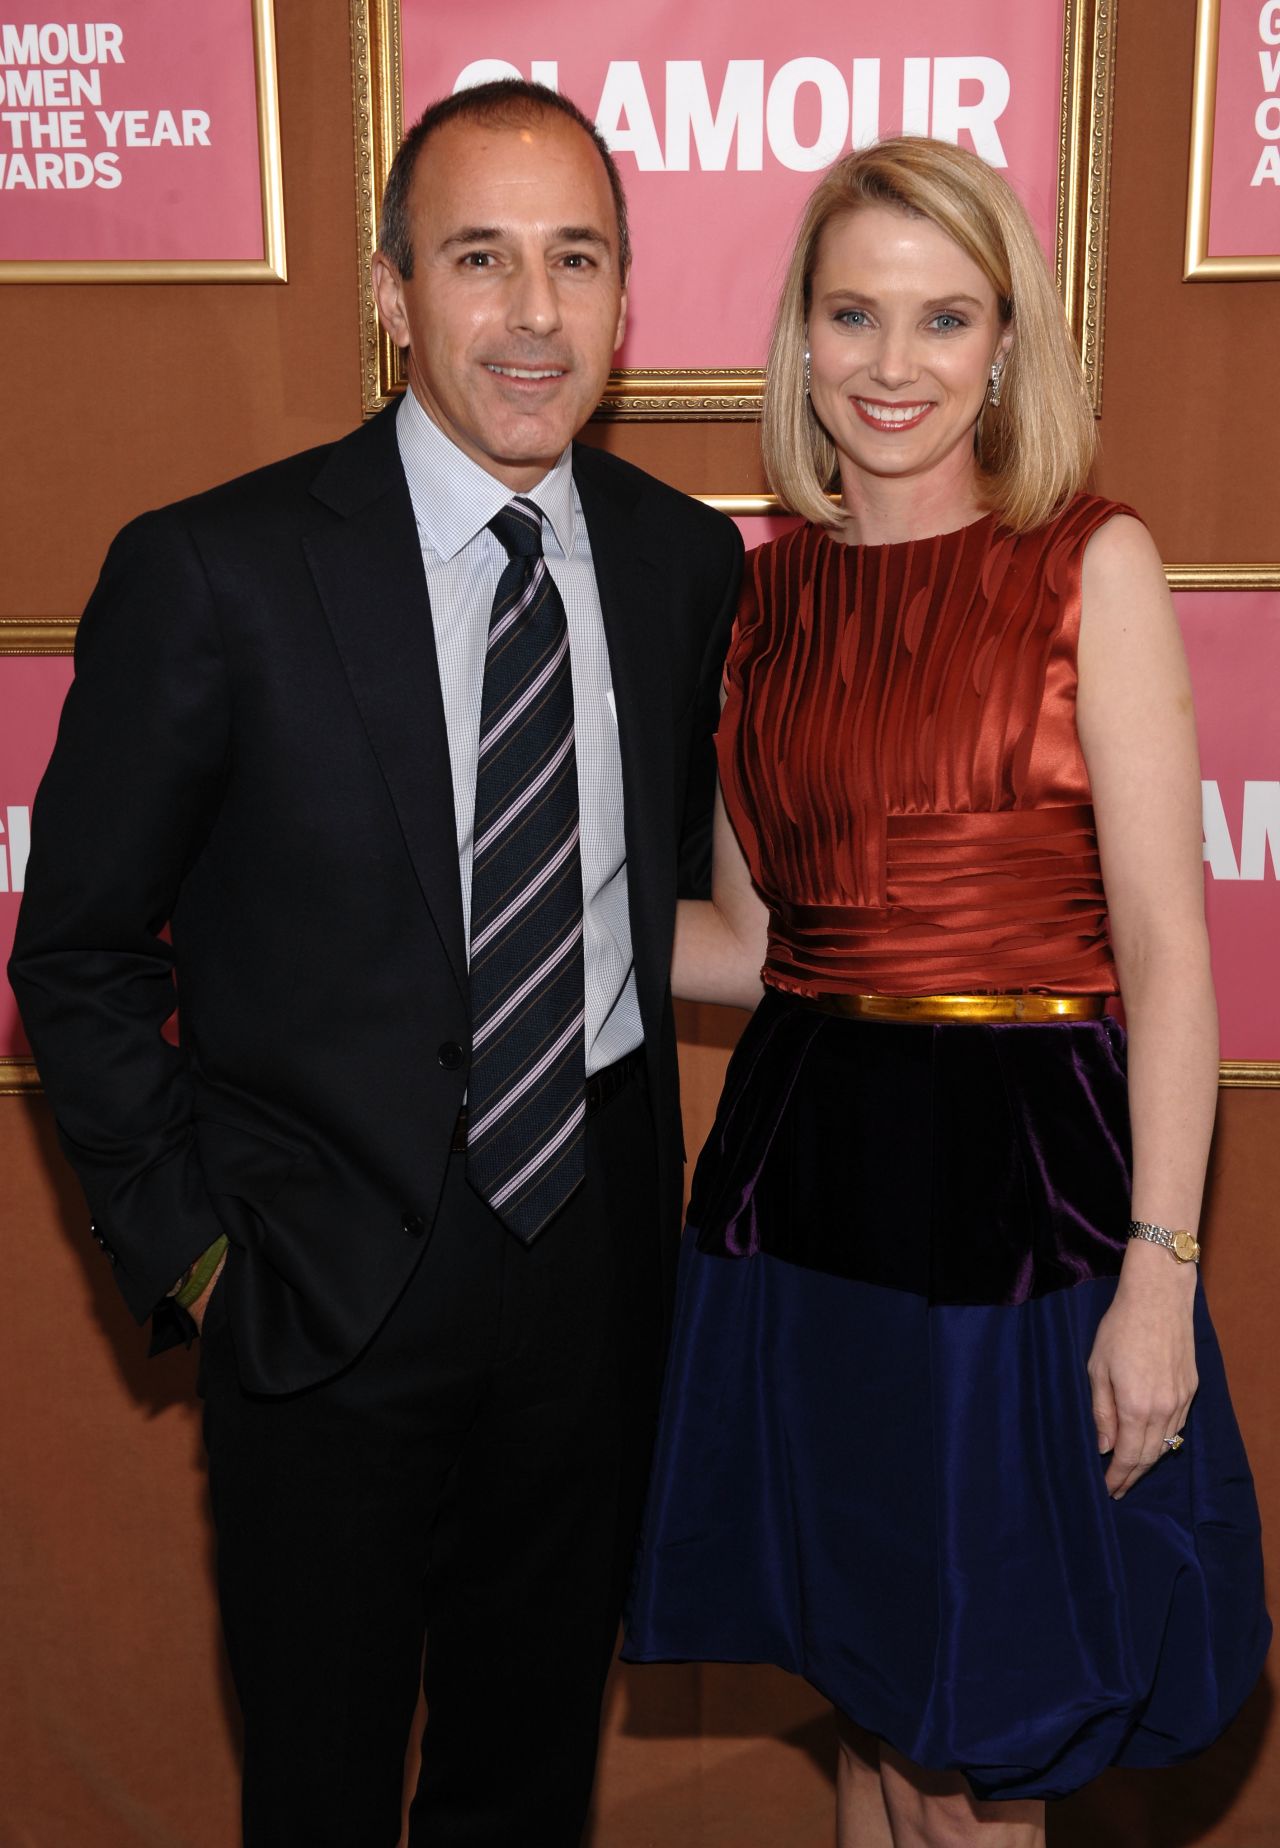 News anchor Matt Lauer and Mayer attend the The 2009 Women of the Year hosted by Glamour Magazine at Carnegie Hall in New York City in November 2009.